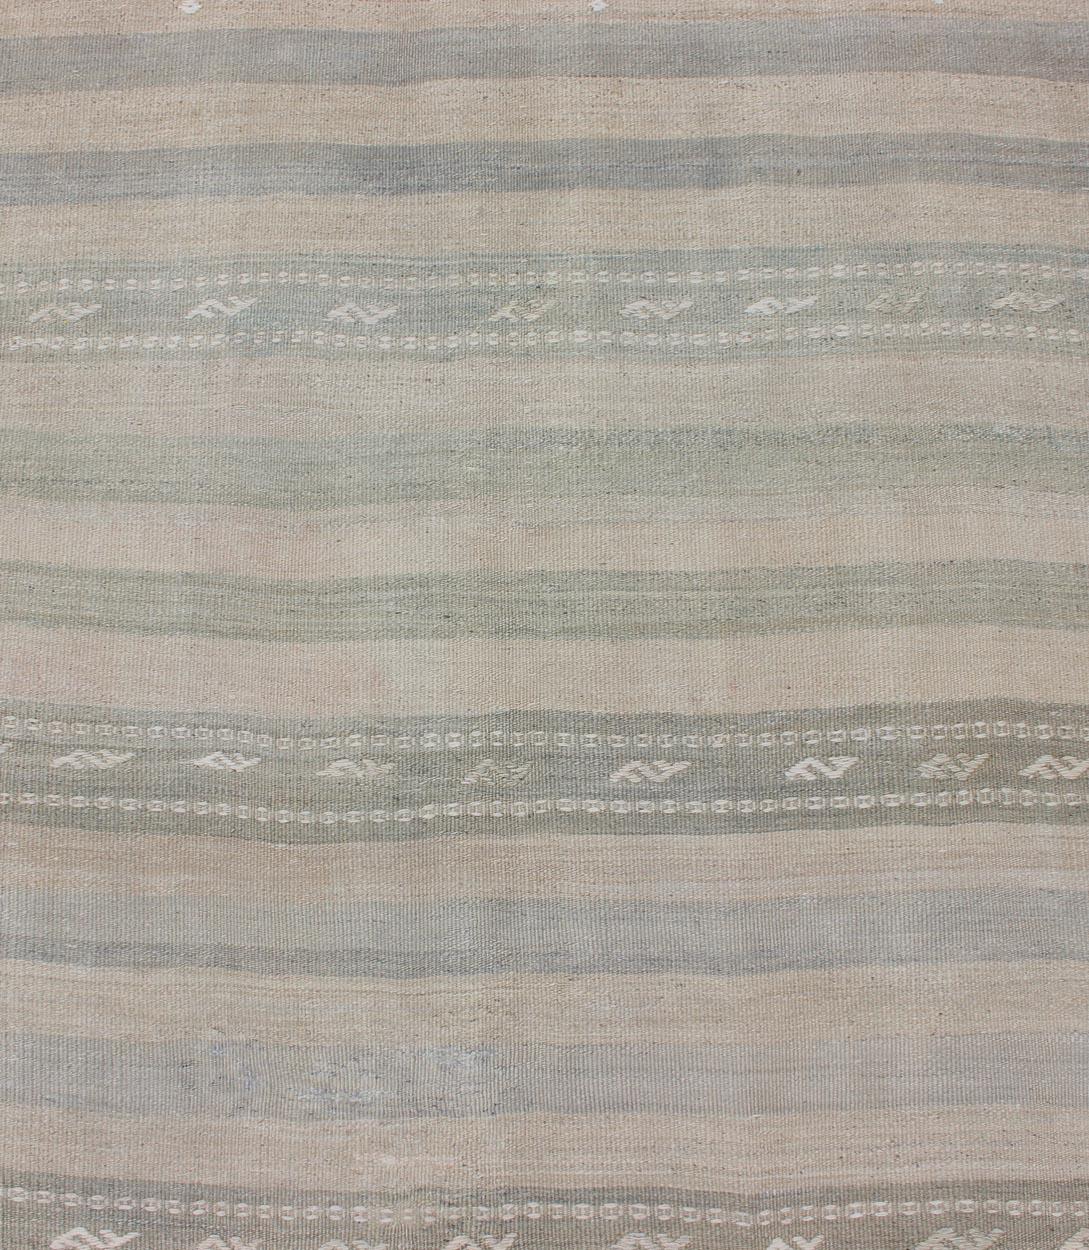 20th Century Vintage Turkish Kilim Runner with Stripes in Light Taupe and Neutral Tones For Sale